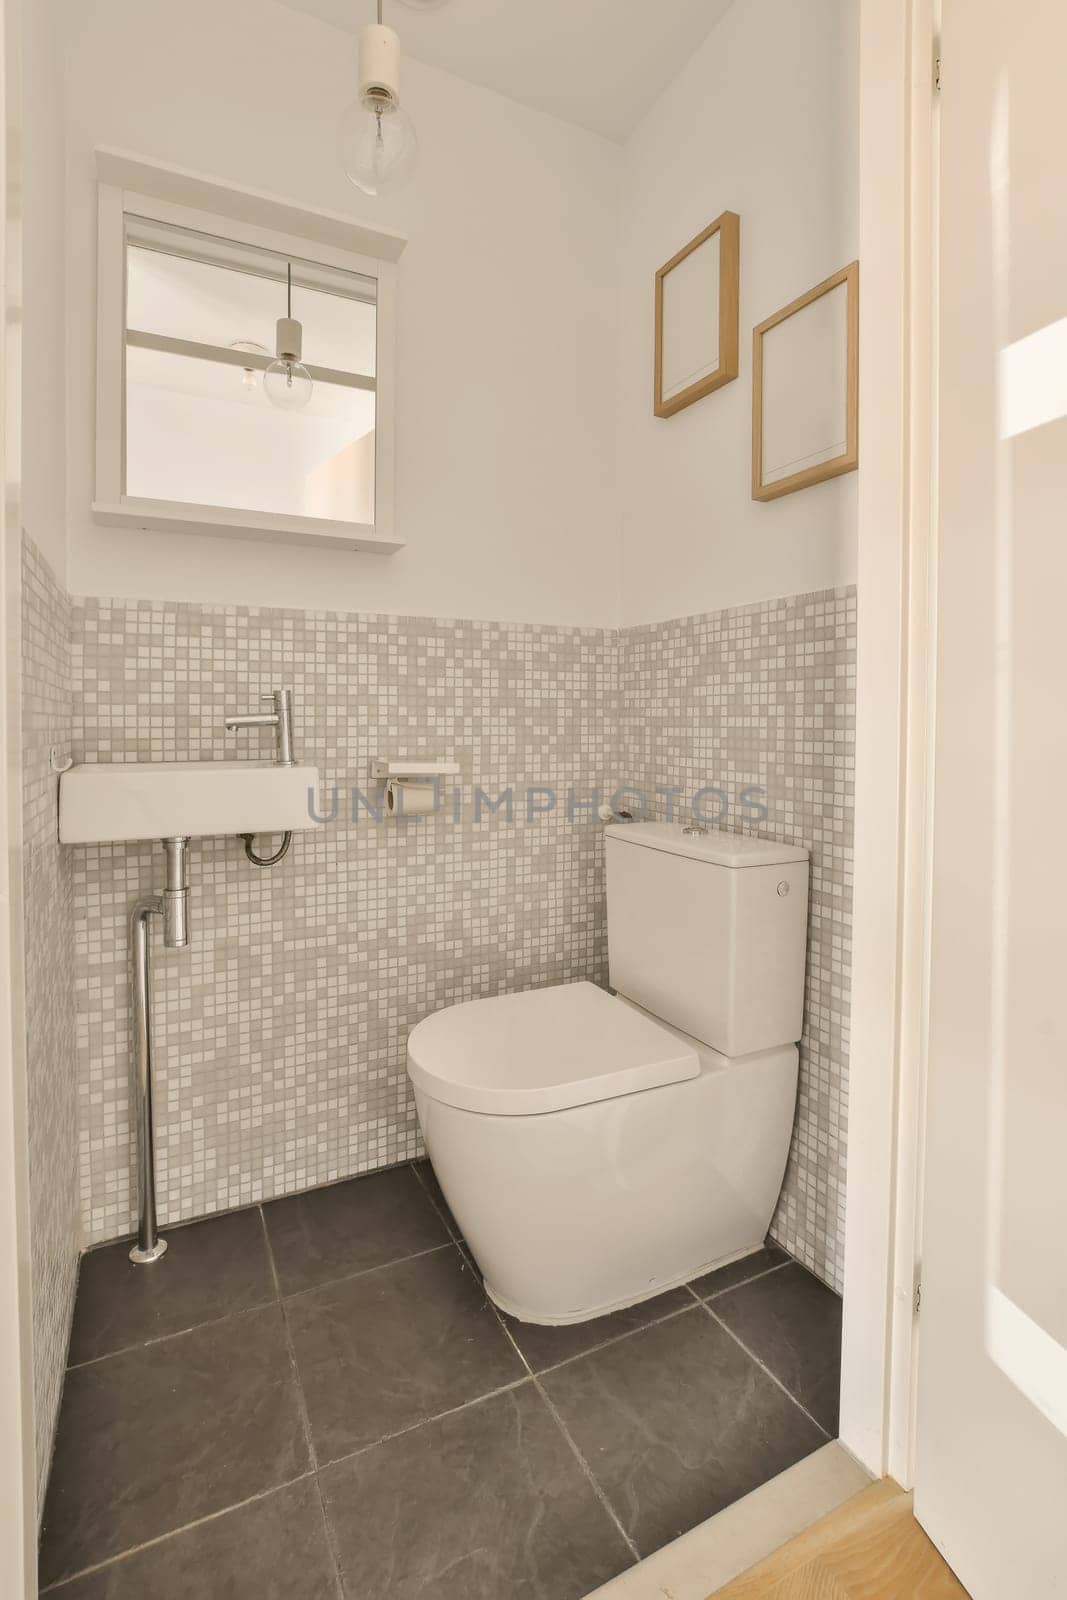 a white toilet in a small bathroom with grey tiles on the walls and floor to the right is a mirror